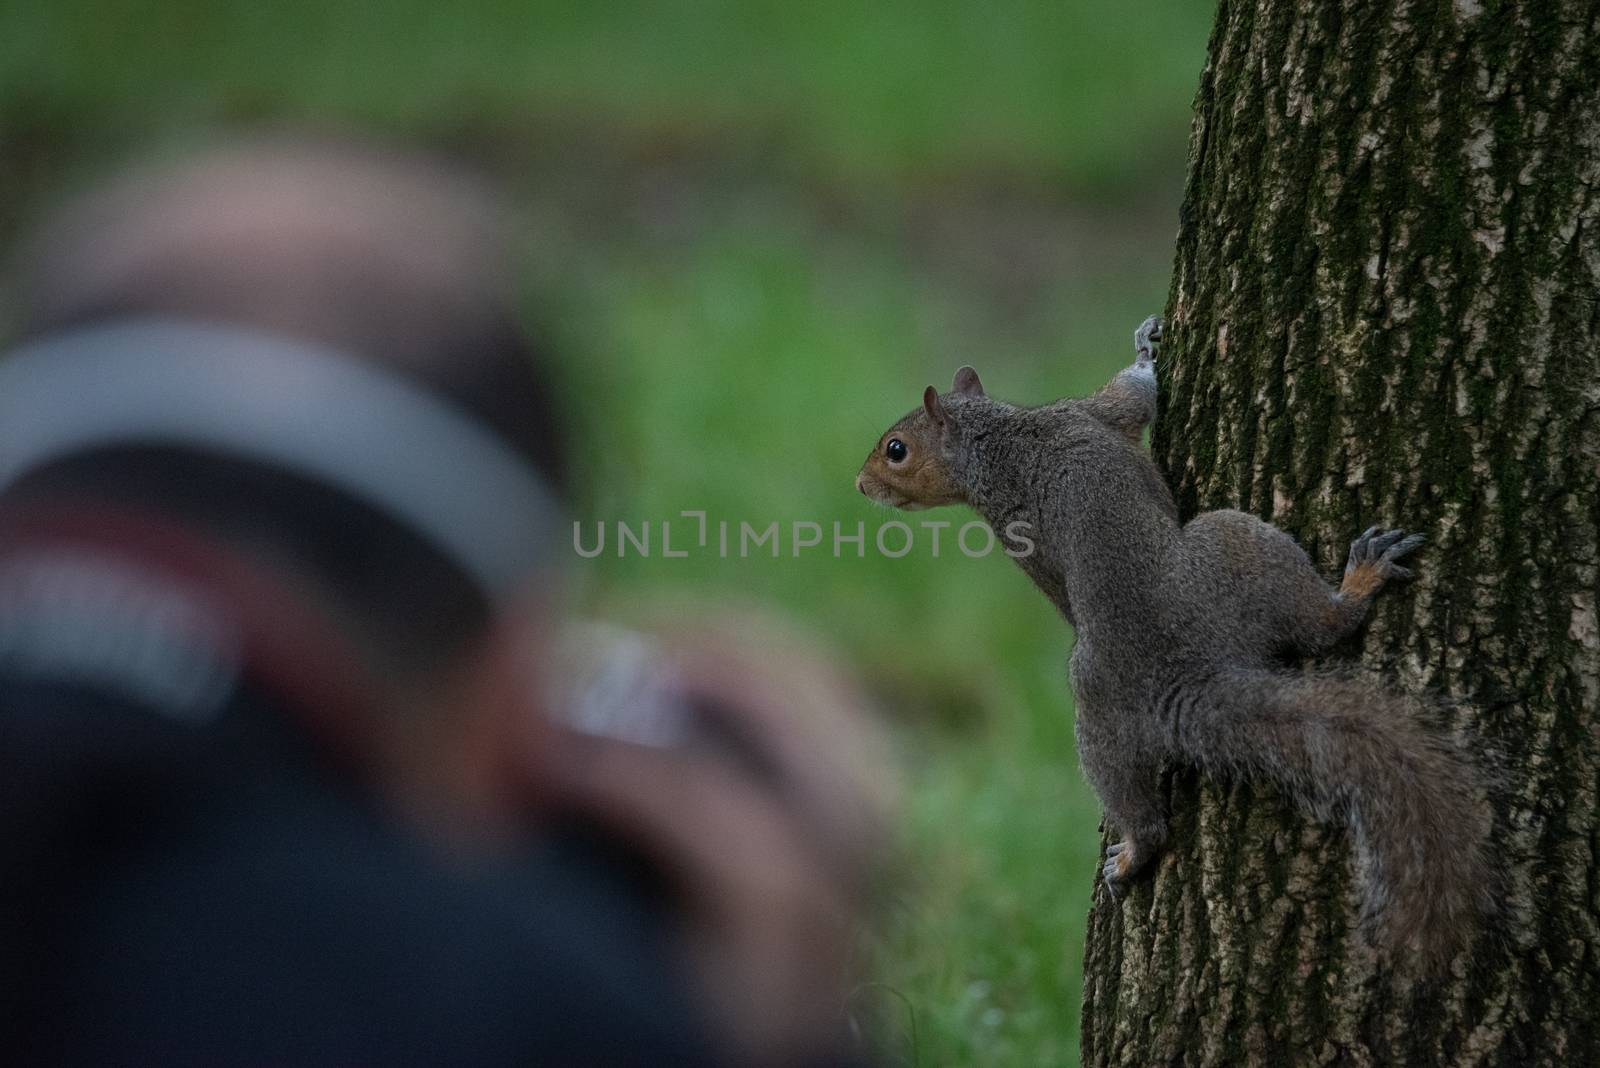 Gray squirrel photographed while climbing a tree by brambillasimone